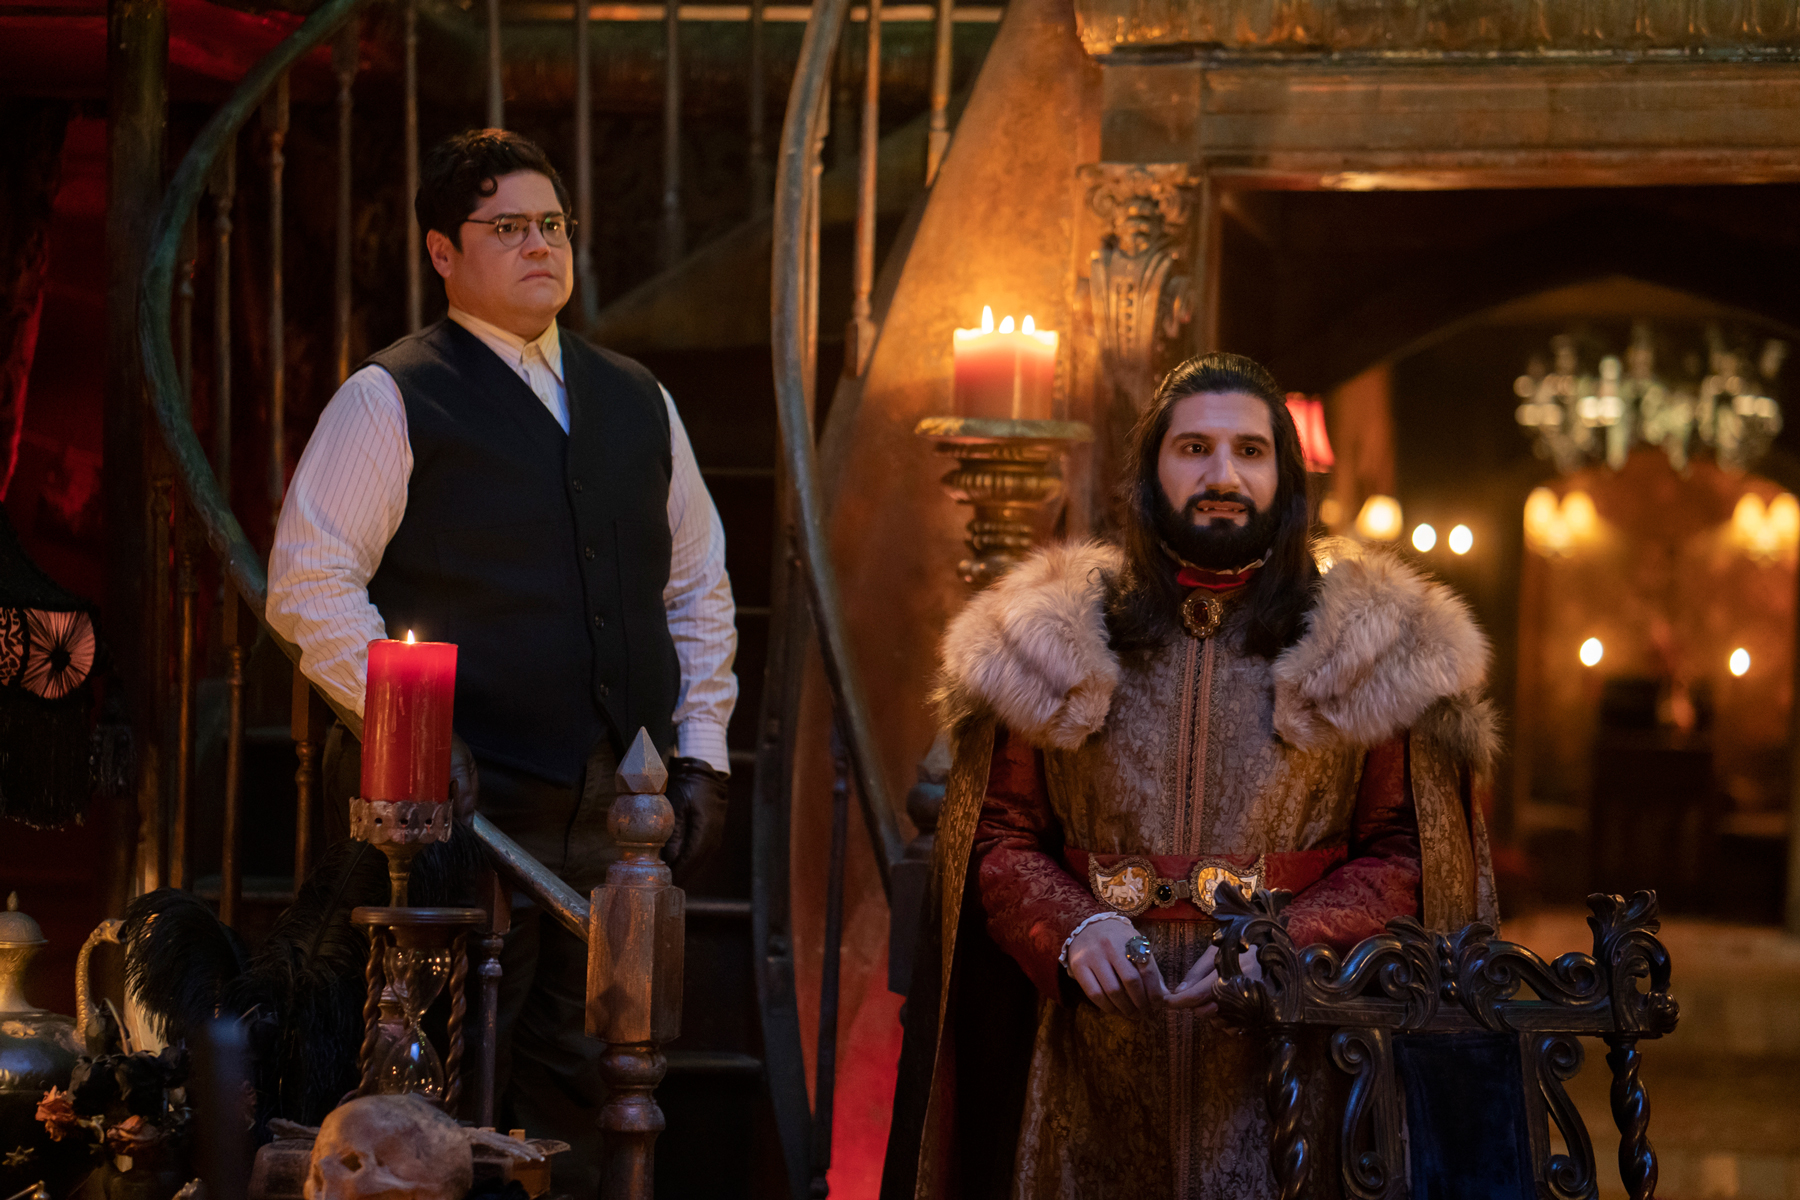 “WHAT WE DO IN THE SHADOWS” -- “The Portrait” --  Season 3, Episode 10 (Airs October 28) — Pictured: Harvey Guillén as Guillermo, Kayvan Novak as Nandor.  CR: Russ Martin/FX